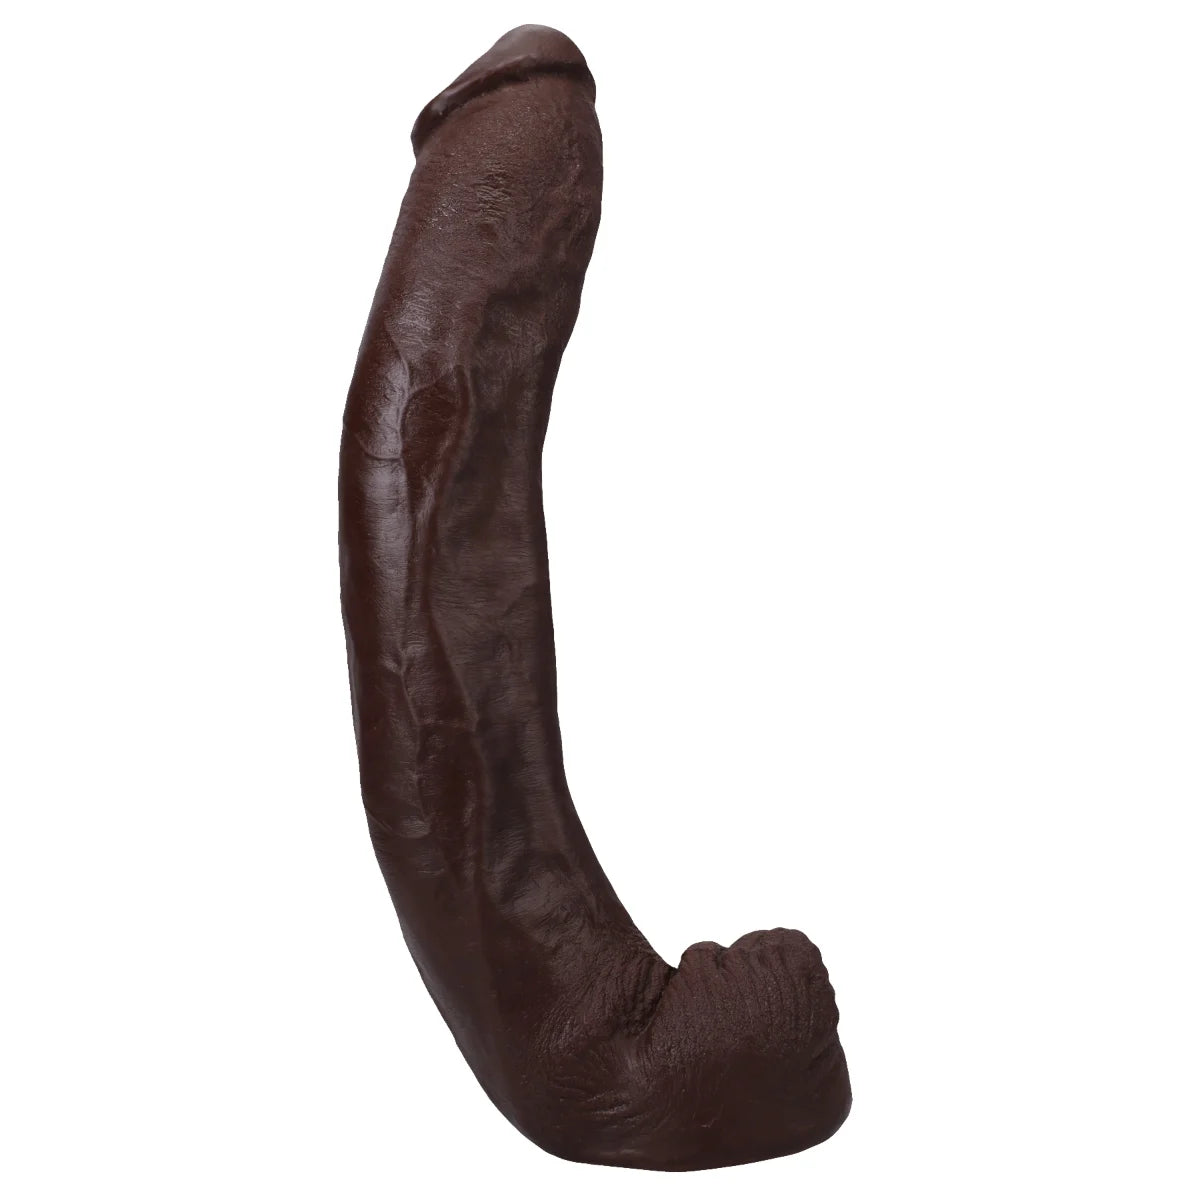 Signature Cocks | Dredd 13.5 Inch ULTRASKYN Cock with Removable Vac-U-Lock Suction Cup